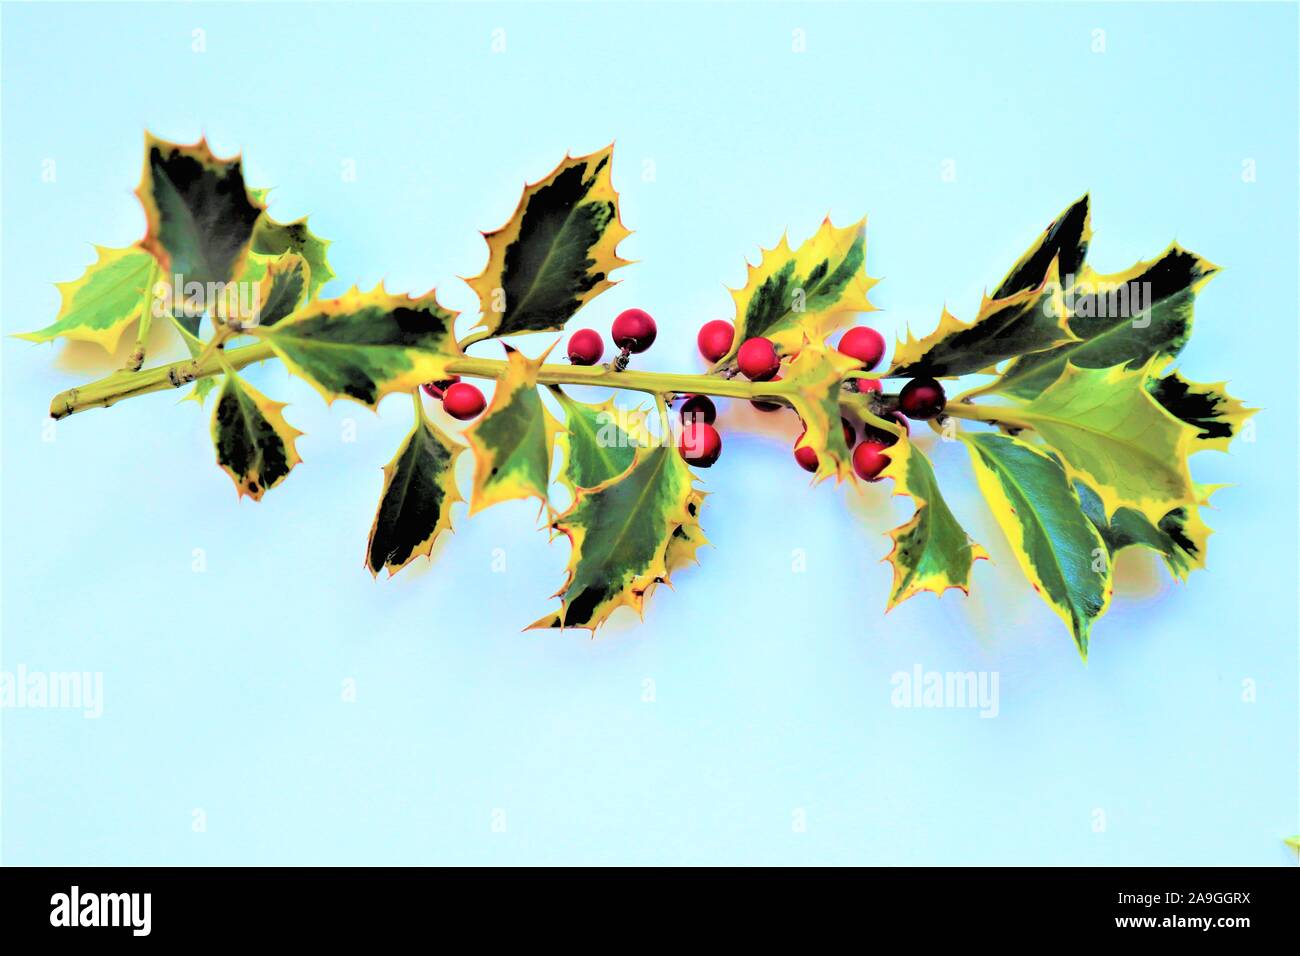 Holly - traditional Christmas plant ion white background.  Element of New Year and Xmas Holly branch with berries. Winter element for greeting cards, Stock Photo